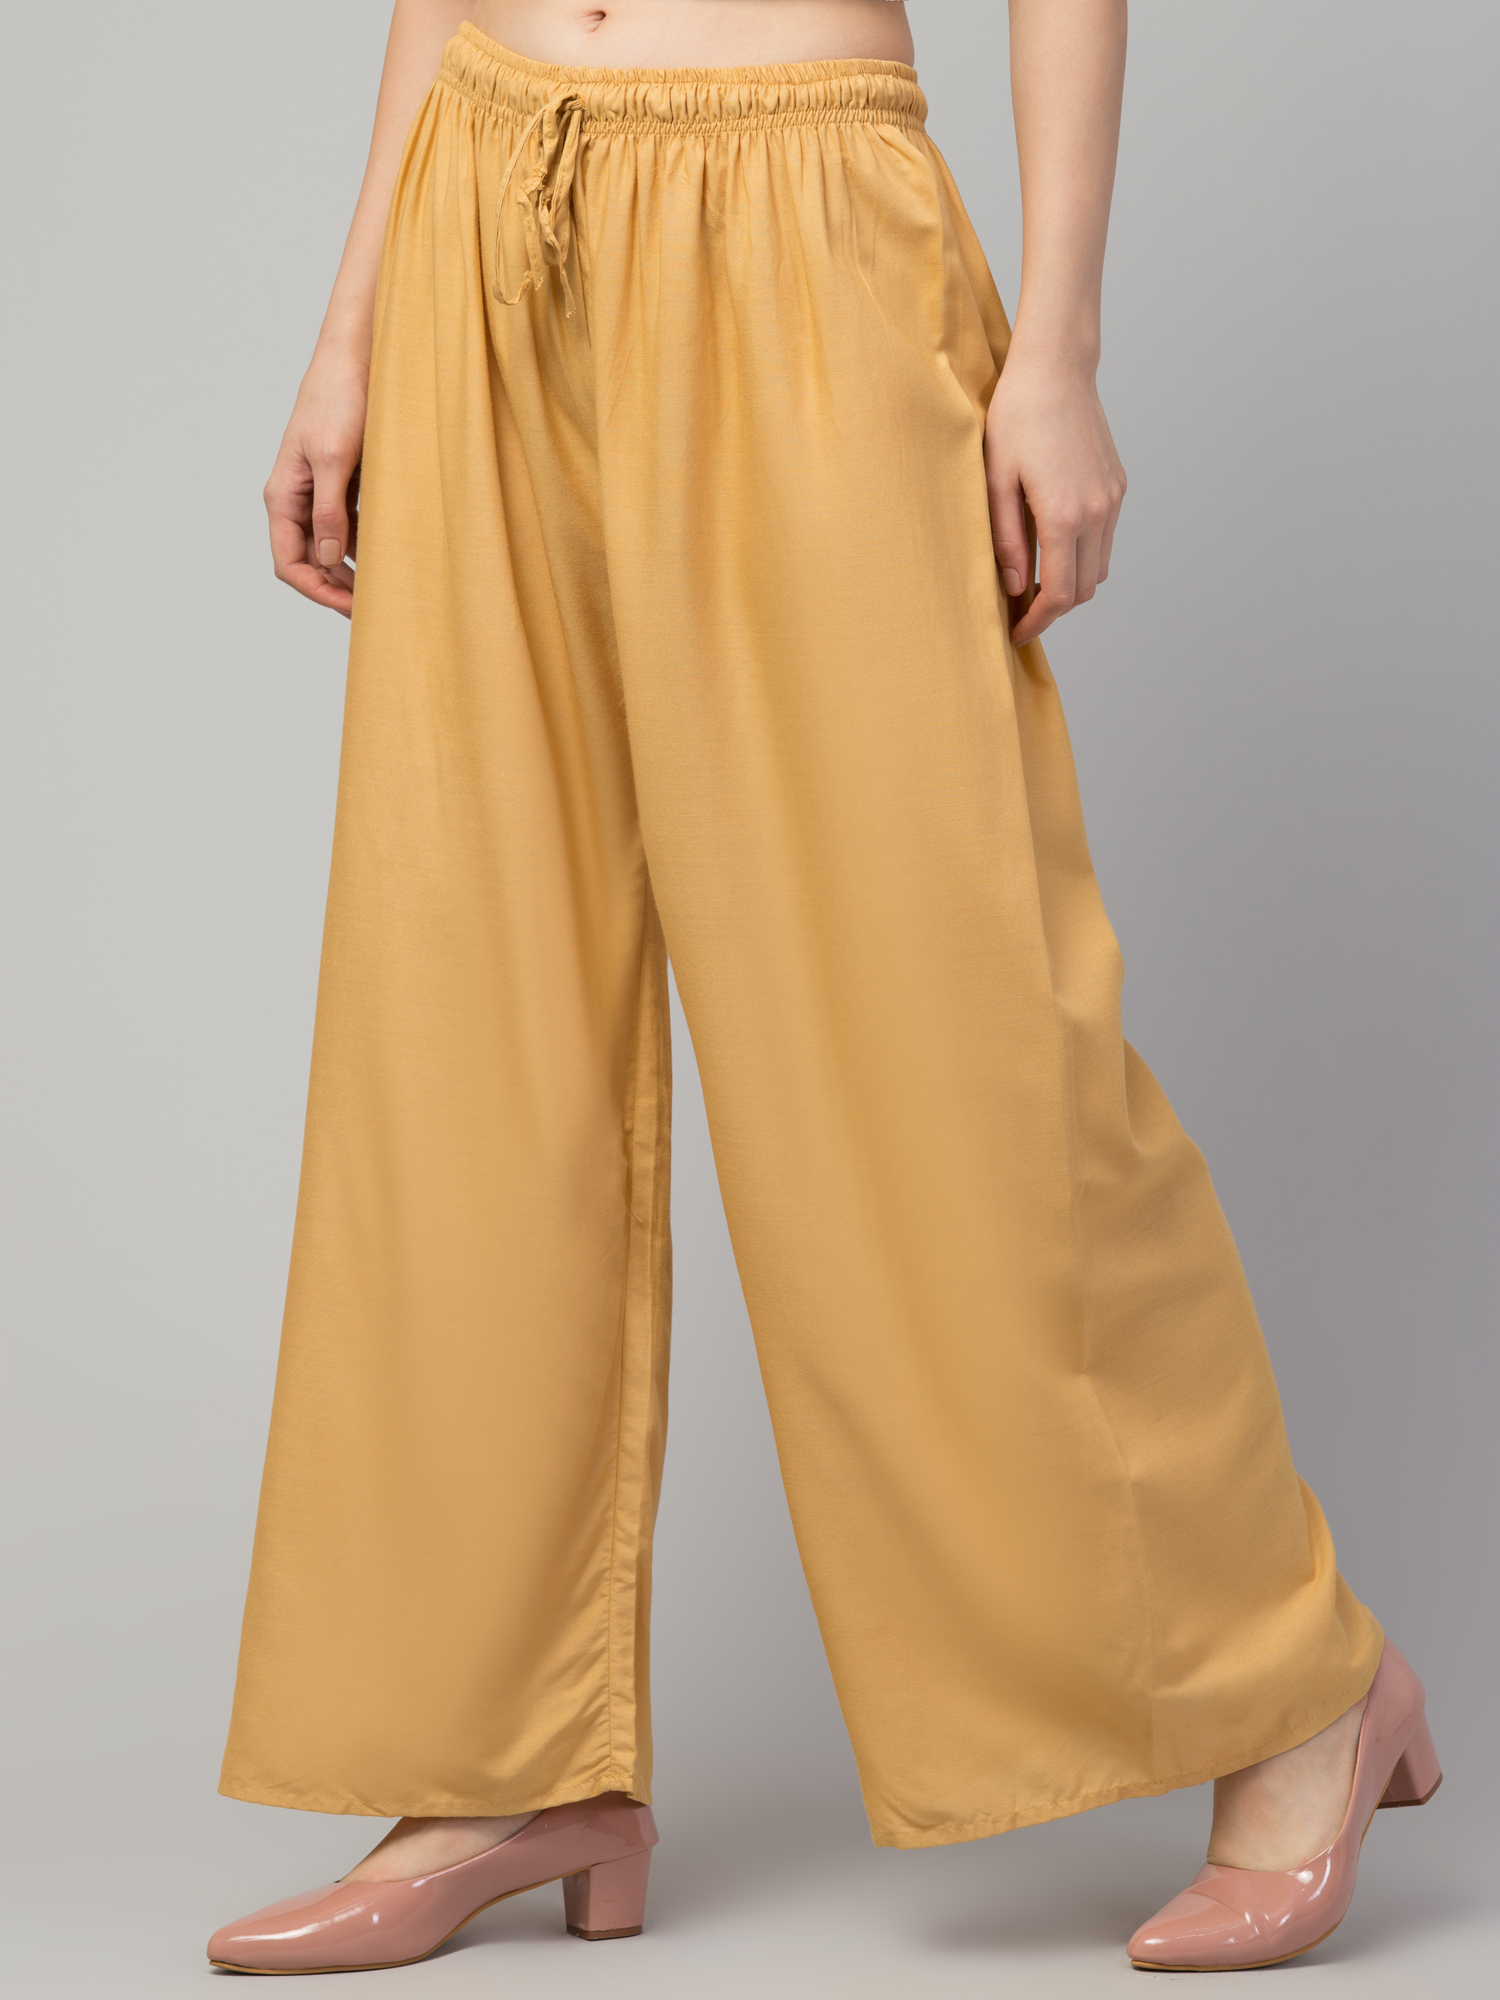 Wome's Full Chiken/Chikankari Relaxed Palazzo pant Gold Color (Free Size)